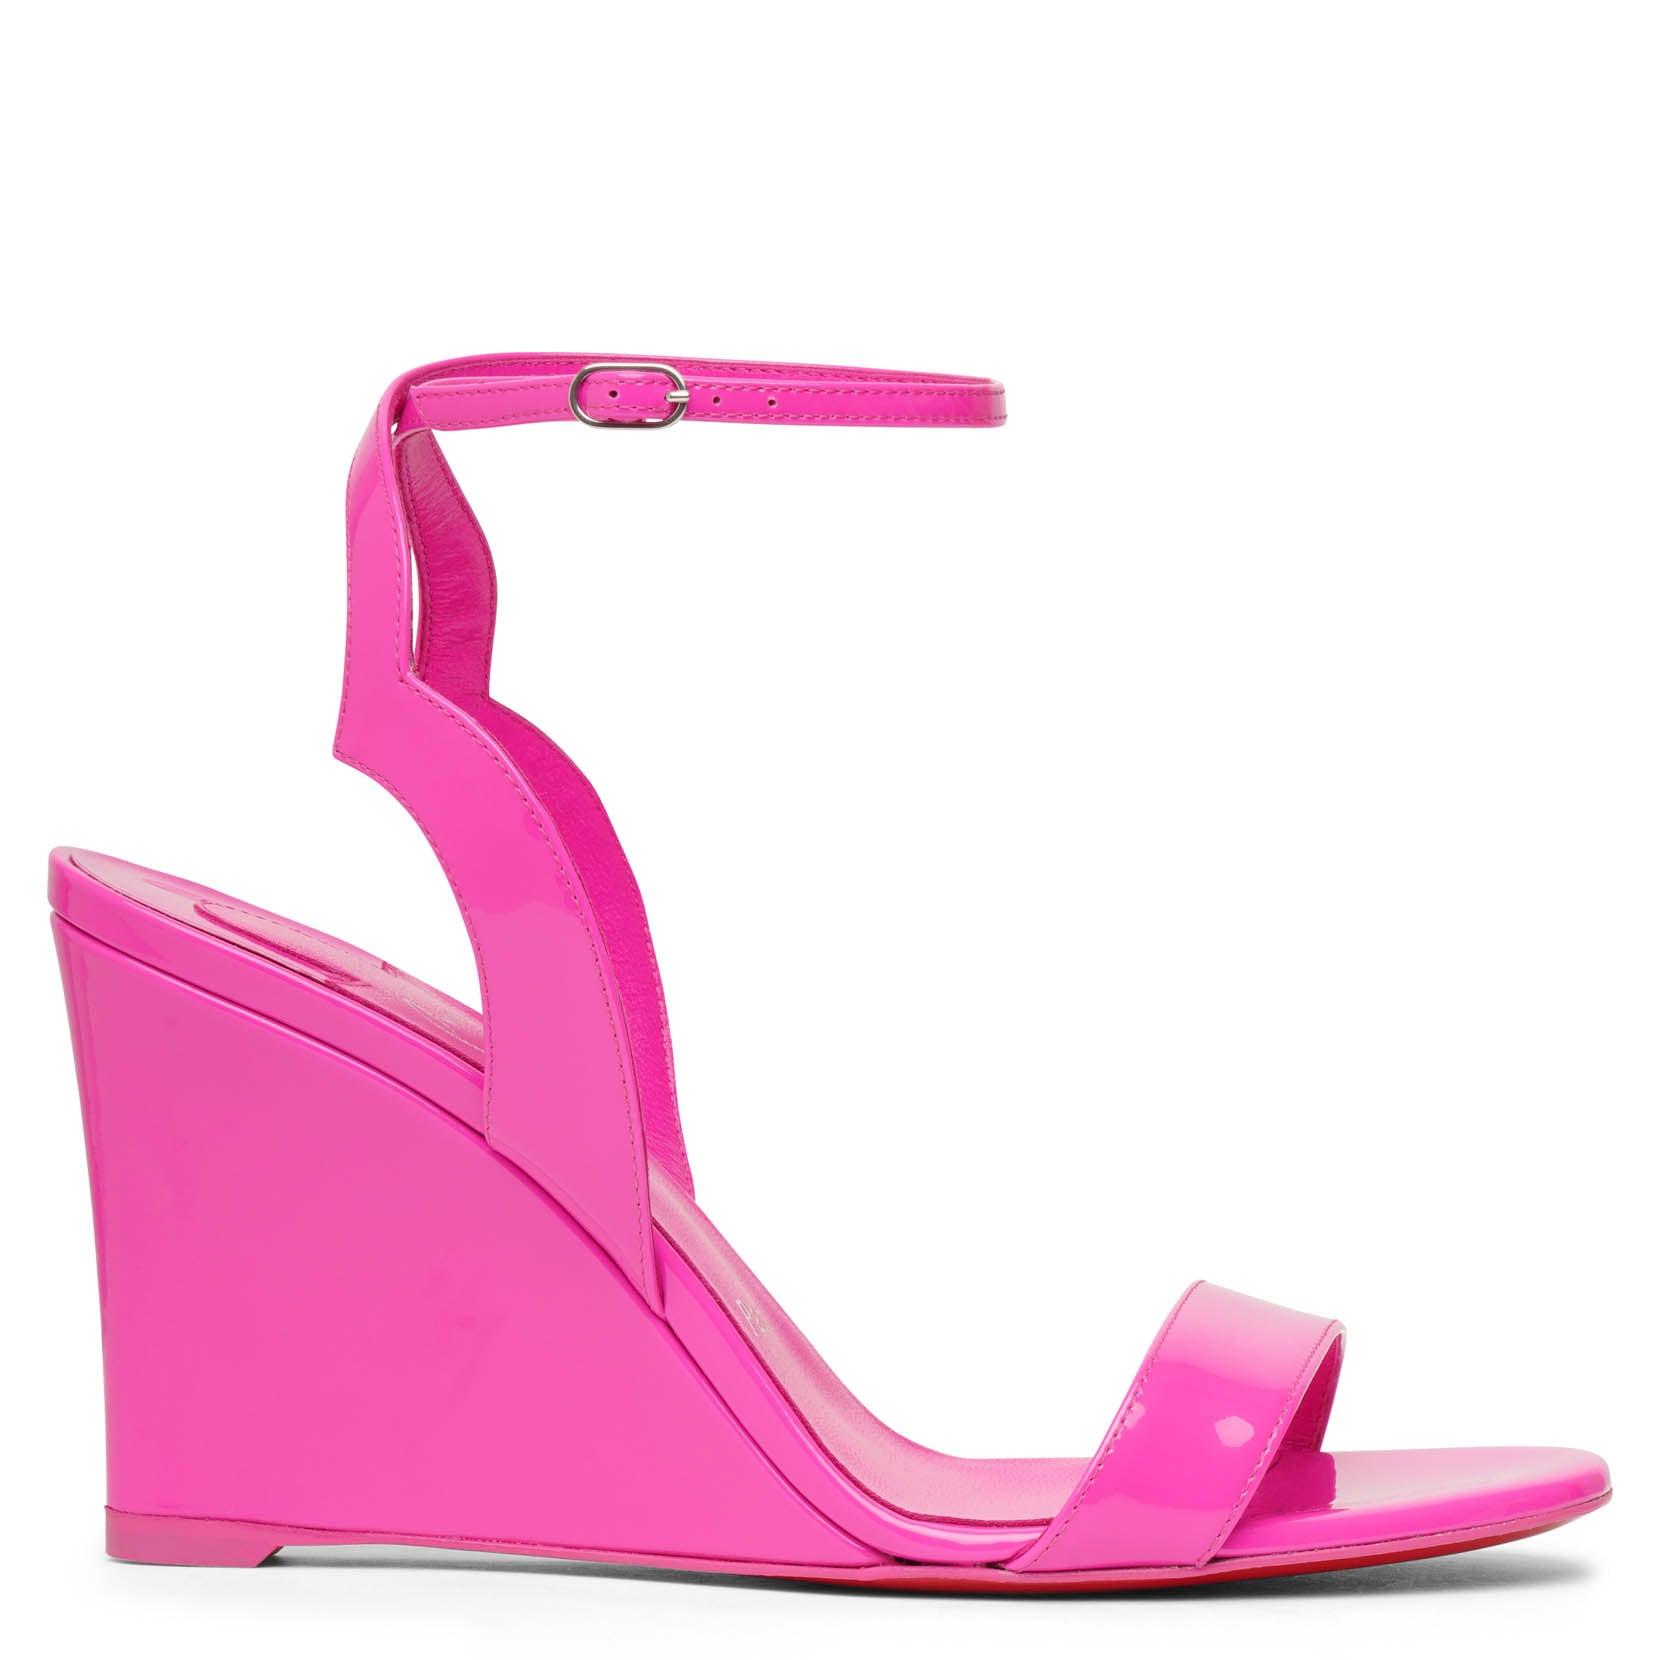 Christian Louboutin Zeppa Chick 85 Leather Heeled Sandals in Pink | Lyst UK